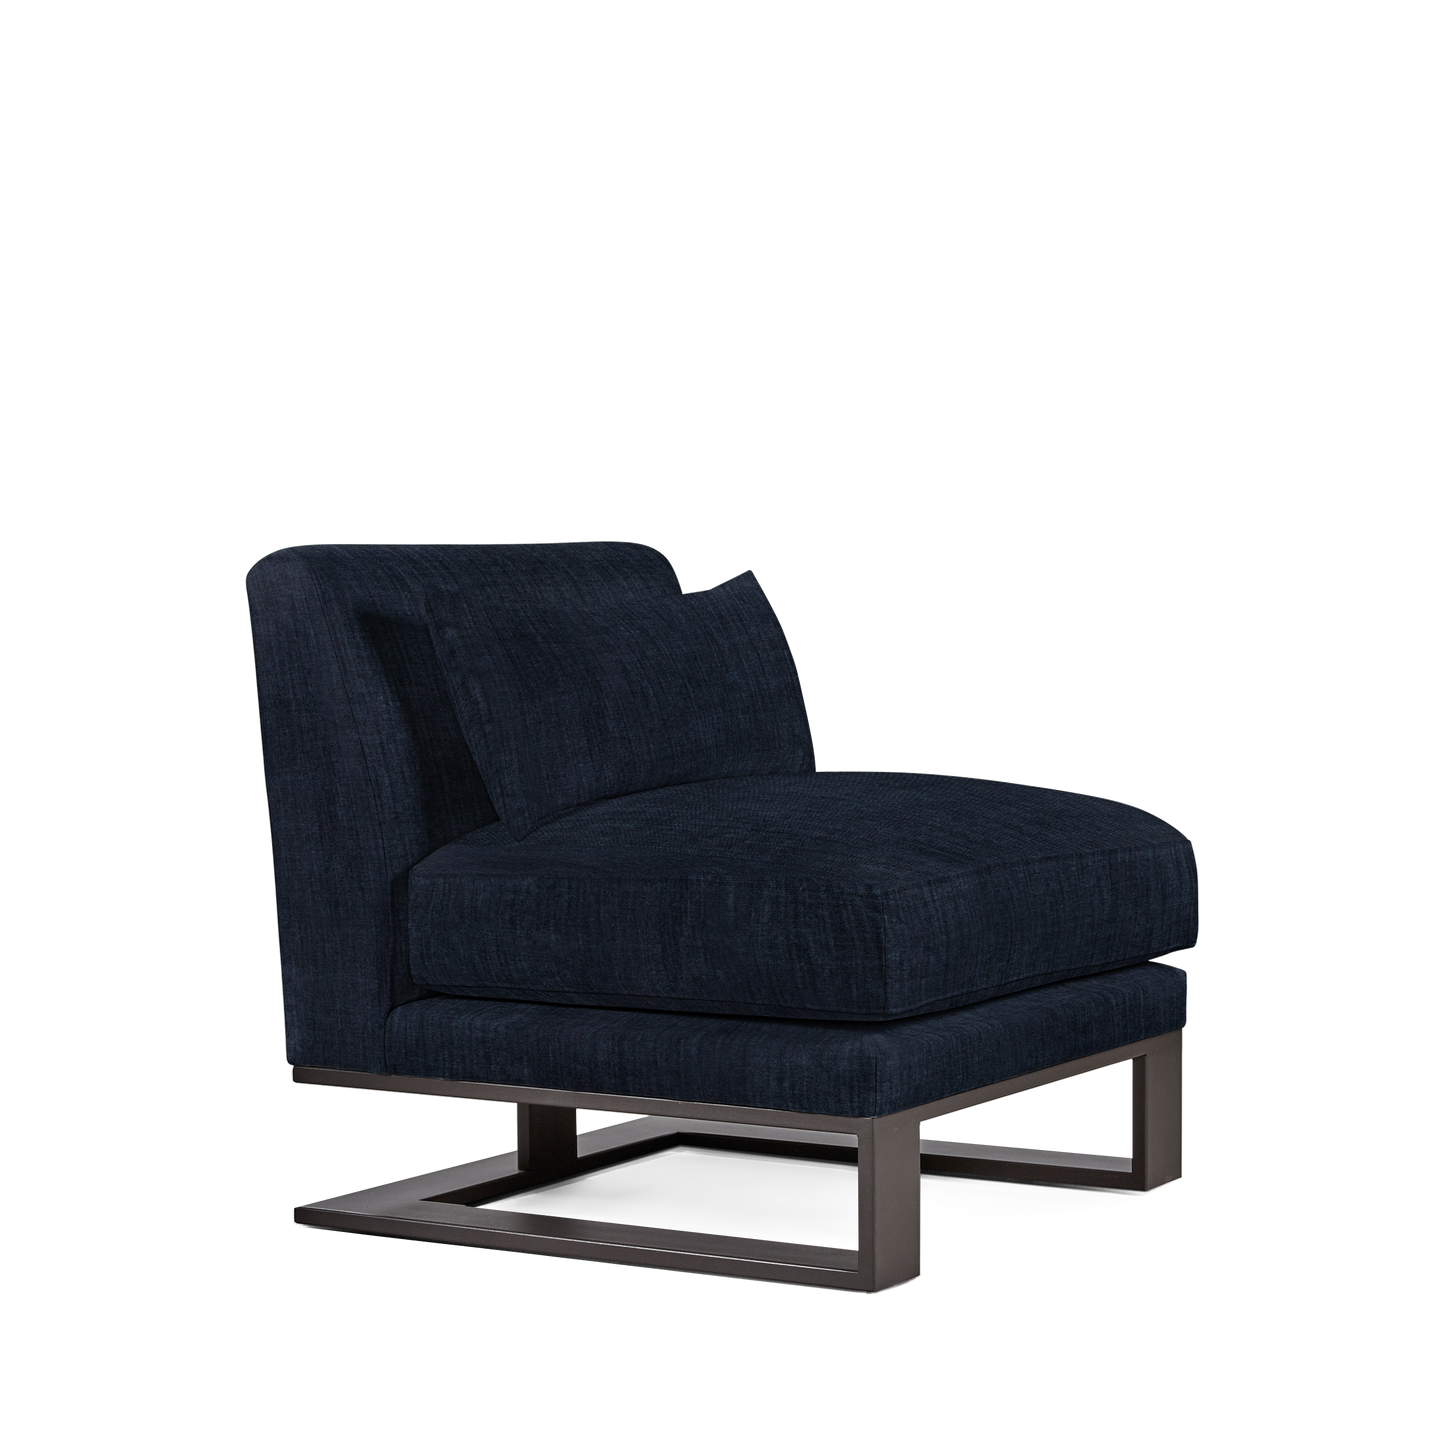 Alpes armchair with dark blue textile and moka colored wood legs